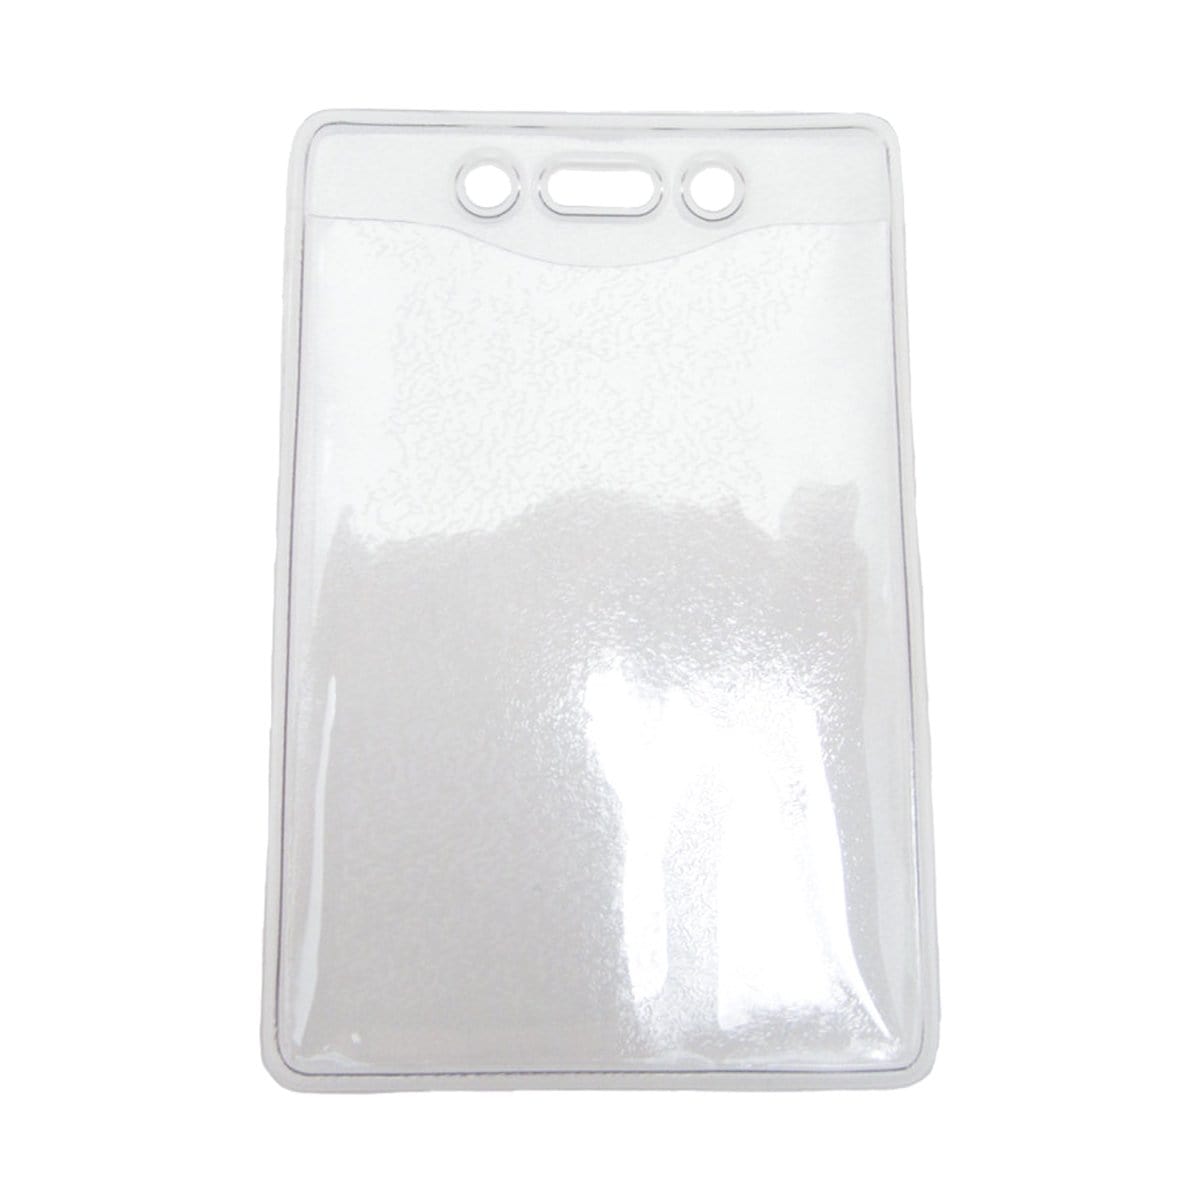 Clear Vinyl Vertical Government/Military Card Size Badge Holder With Slot And Chain Holes (P/N 1815-1300) 1815-1300